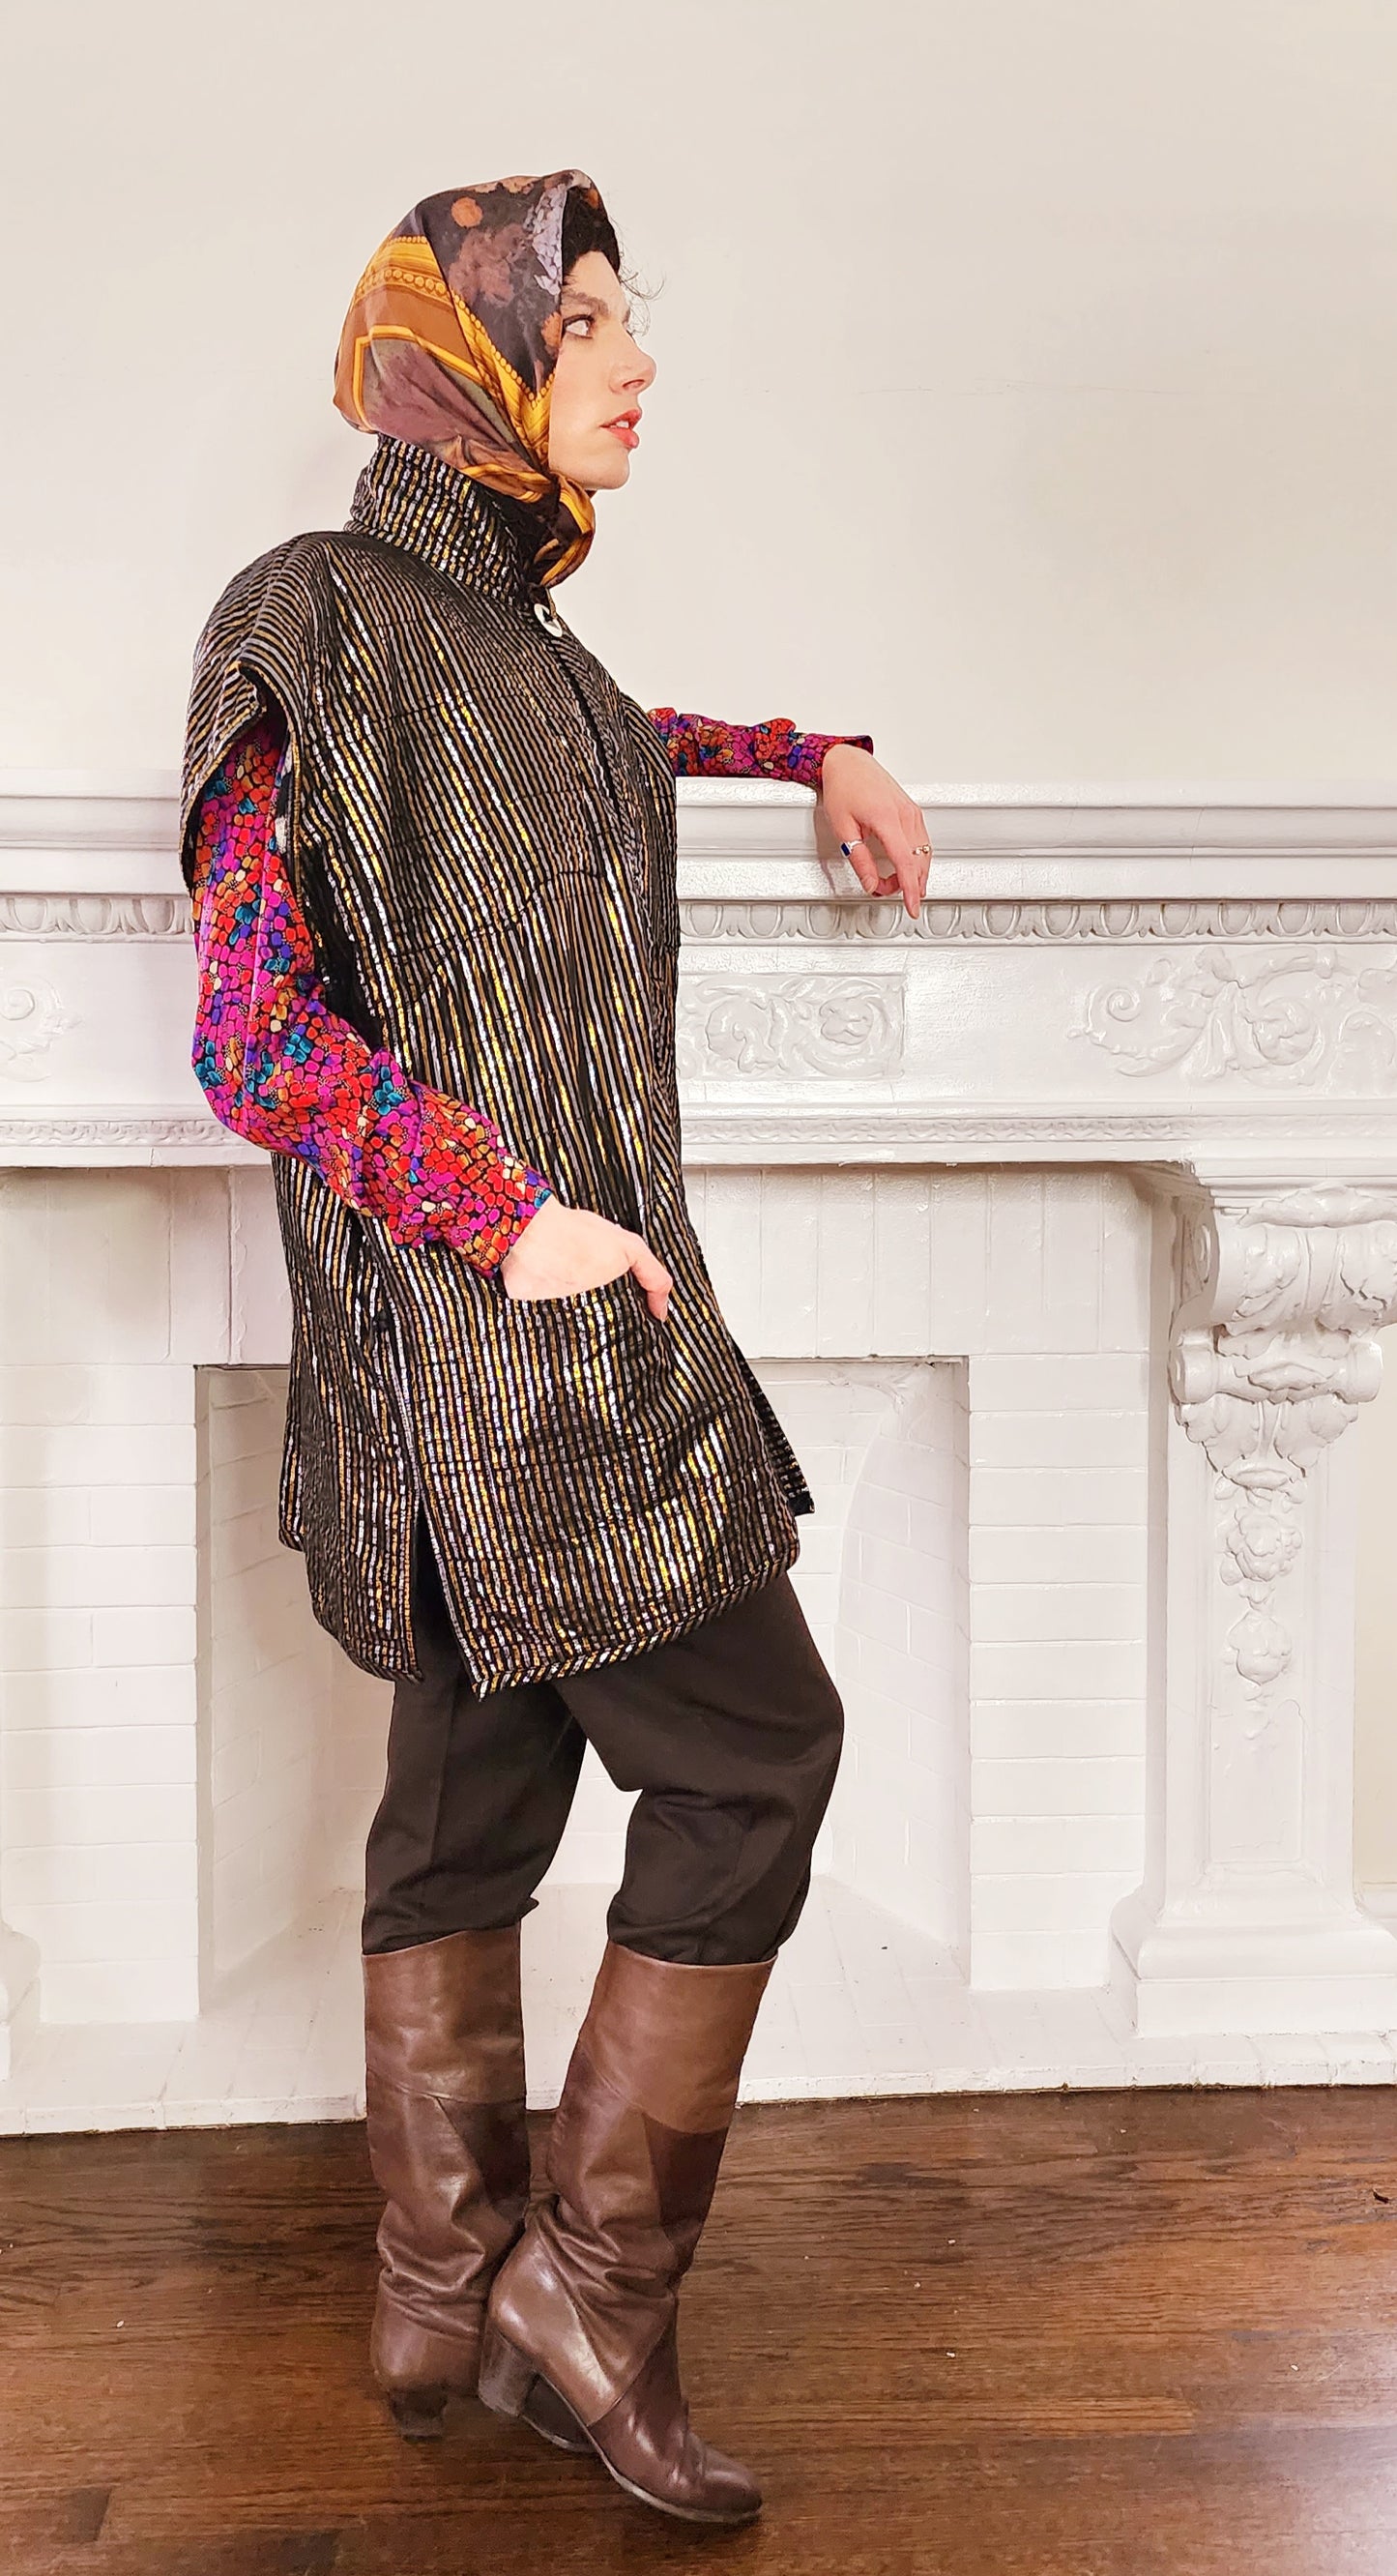 90s Artisinal Handmade Jacket Tunic Vest Reversible in Mixed Media & Leather by Nadya Bali